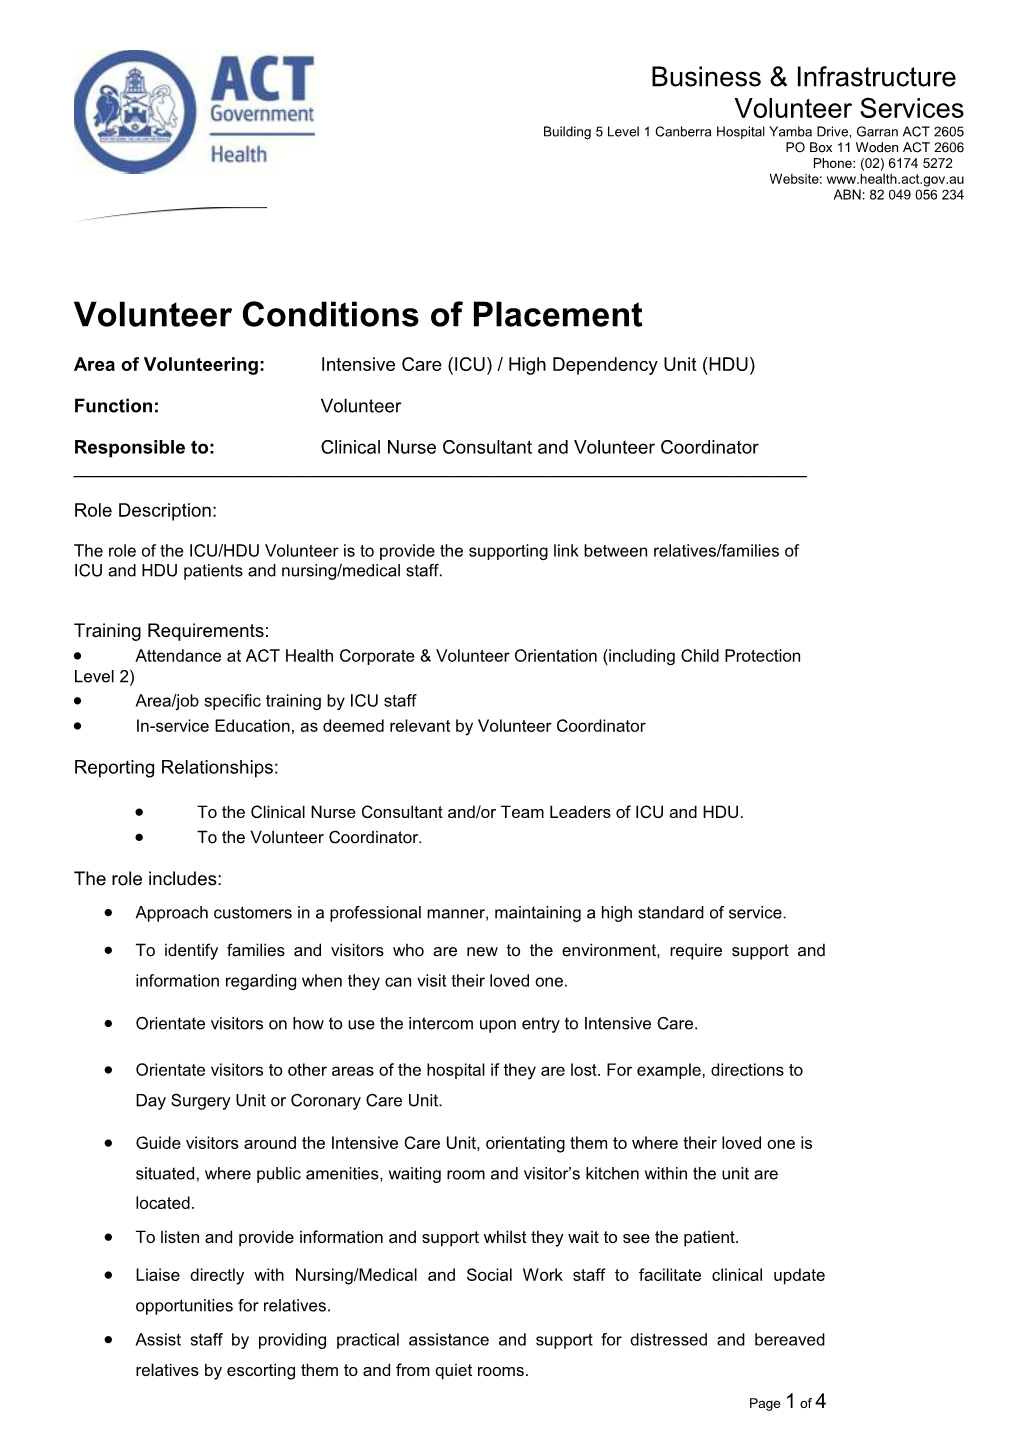 Volunteer Conditions of Placement